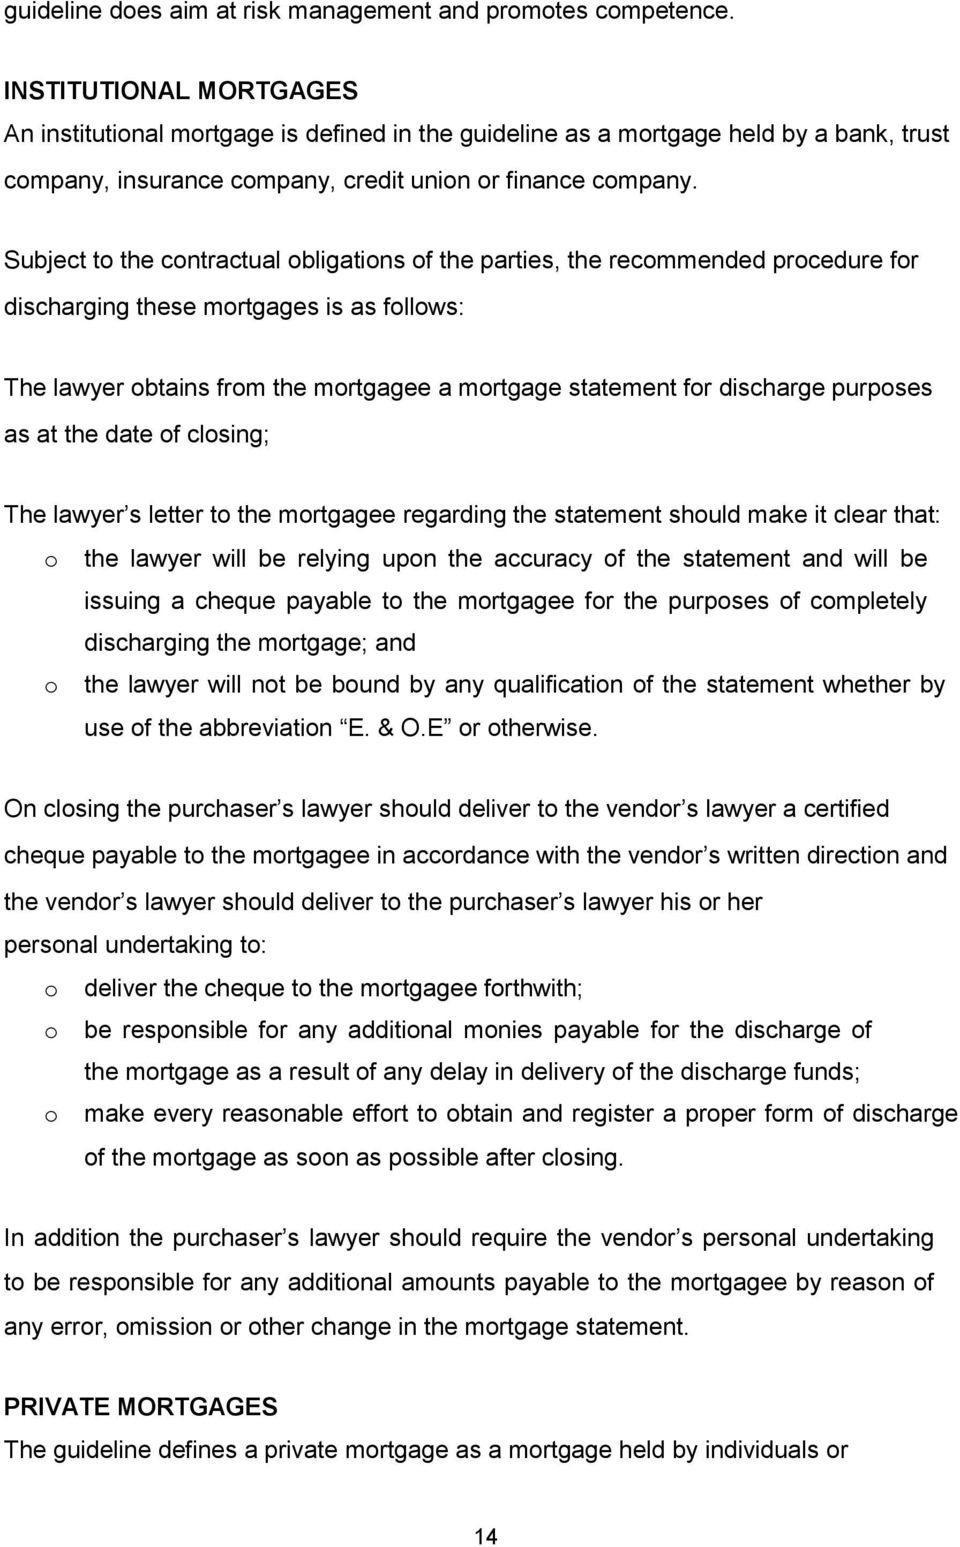 Subject to the contractual obligations of the parties, the recommended procedure for discharging these mortgages is as follows: The lawyer obtains from the mortgagee a mortgage statement for